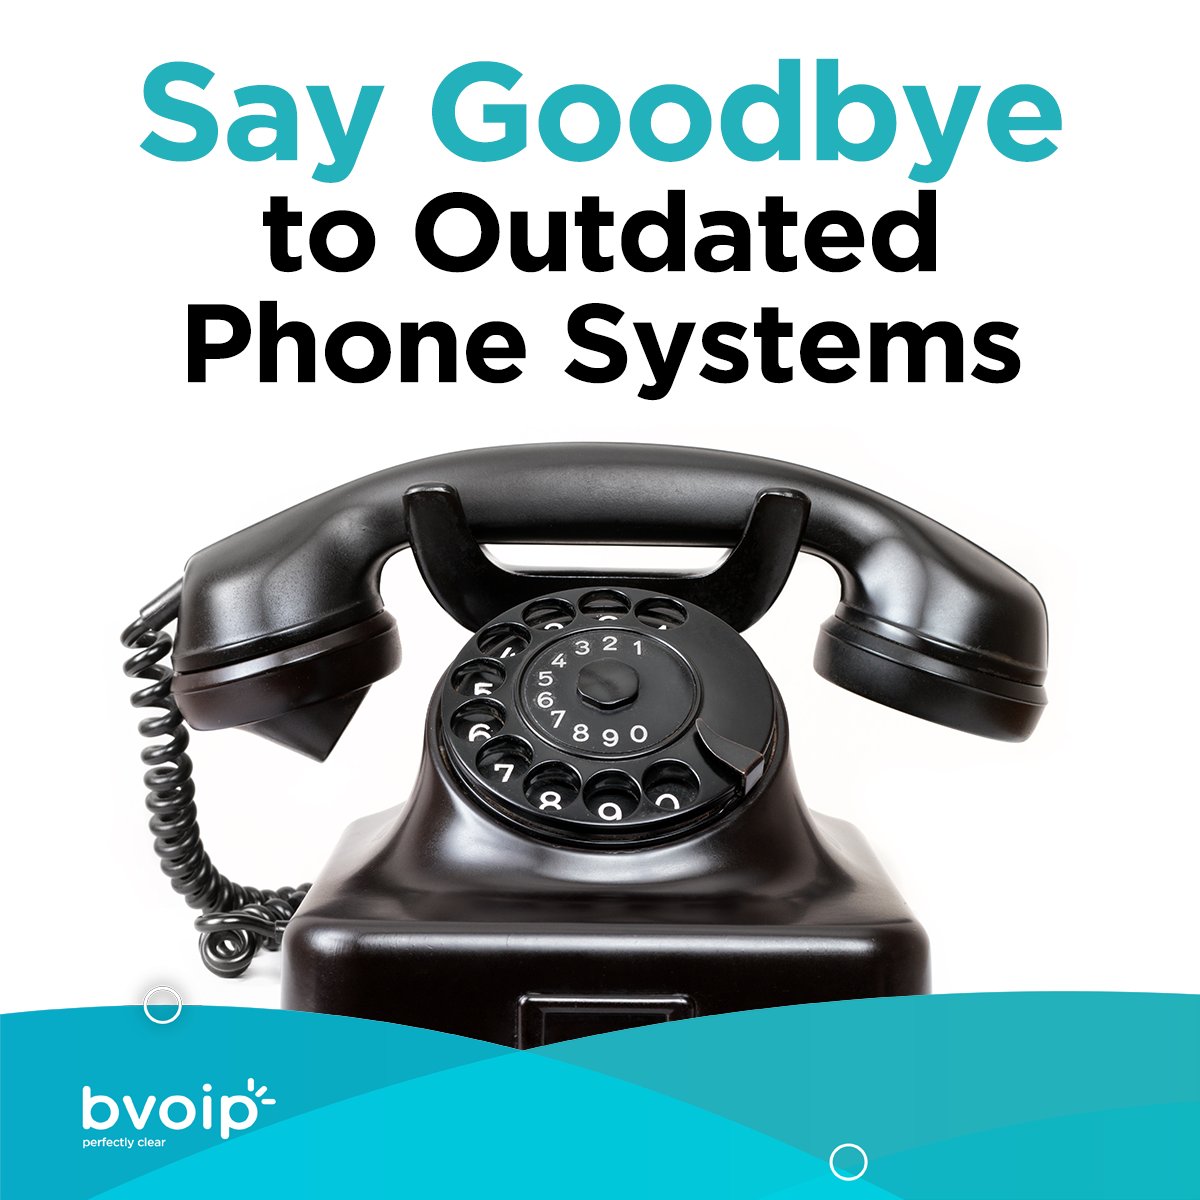 Are you tired of dealing with outdated phone systems? With bvoip's reliable and scalable VoIP solution, you can improve collaboration and communication in your business. bit.ly/3WknSQS
#bvoip #VoiceOverIP #Integrations #VoIP #Collaboration #CloudVoice #MSTeamsIntegration